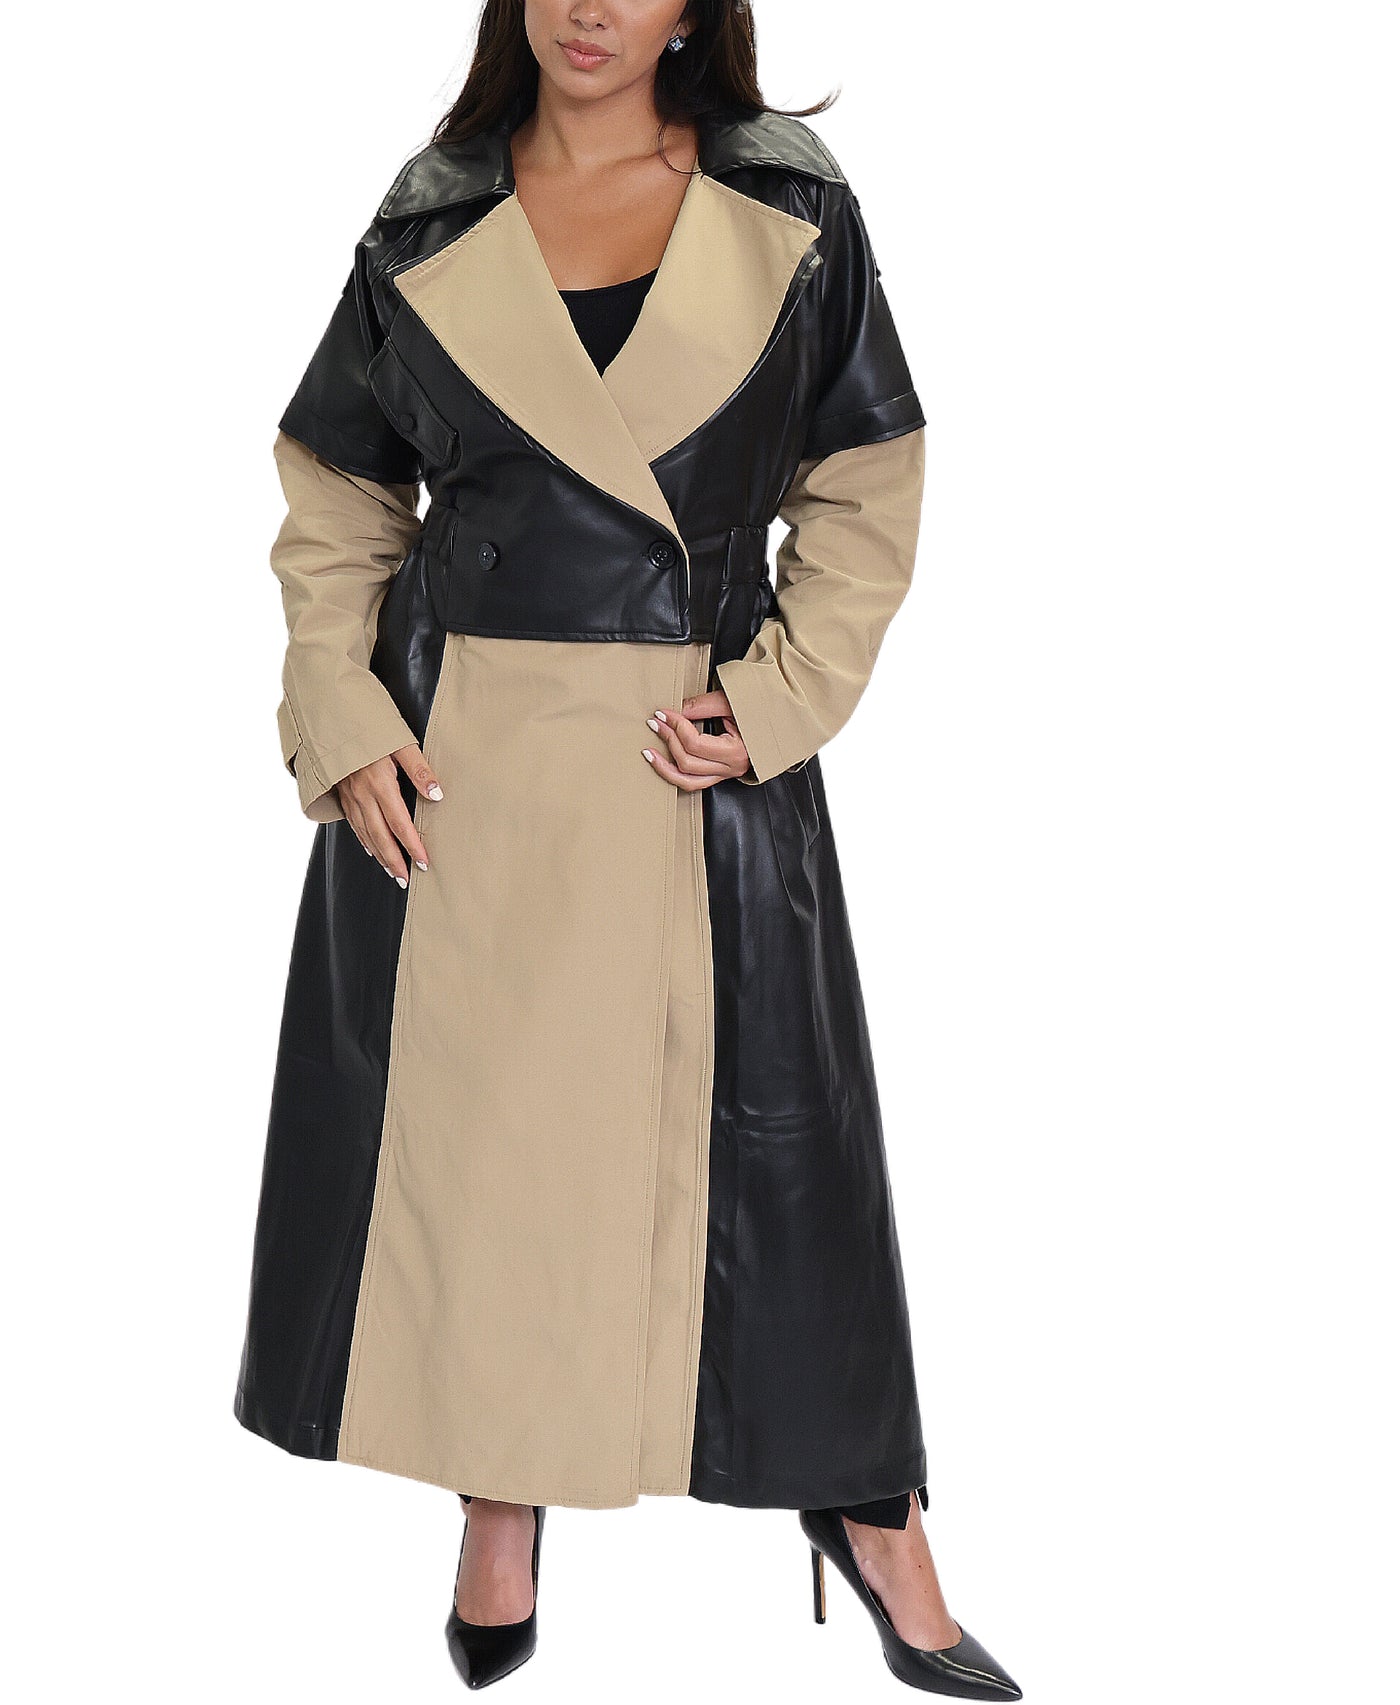 Oversized Trench Coat w/ Faux Leather Trim image 1